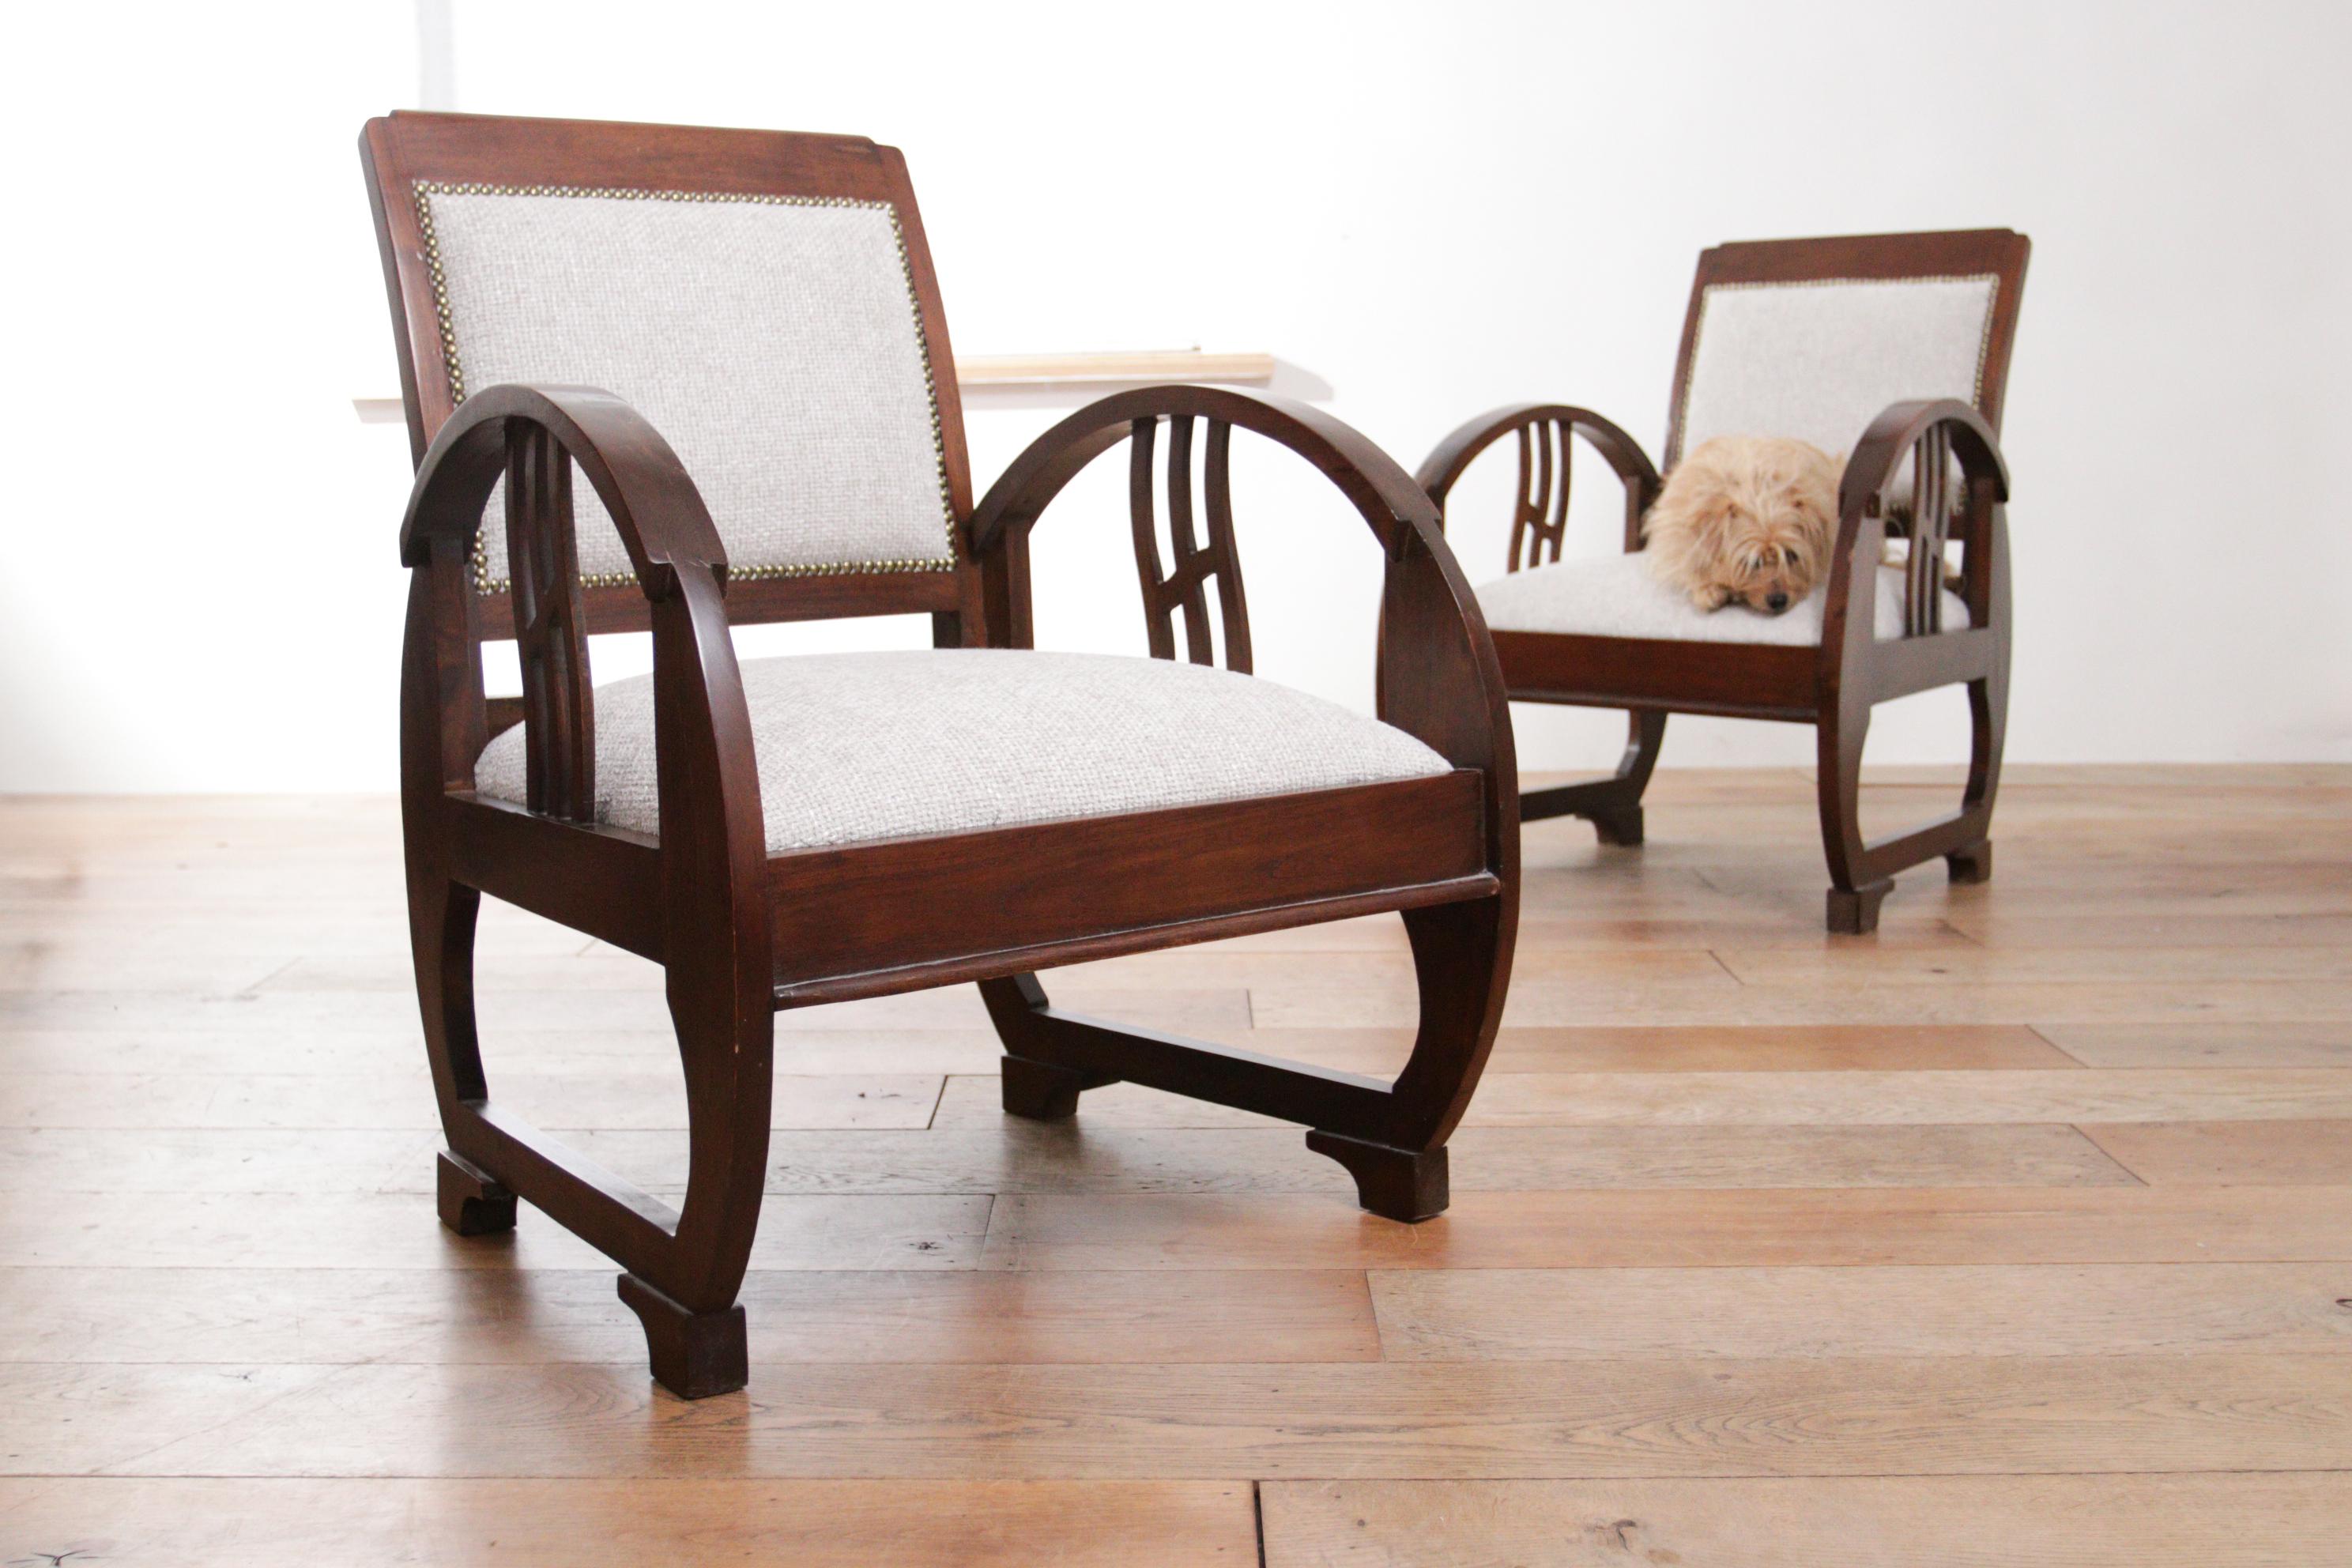 Mid-20th Century Two Rare Exclusive Elegant Art Deco Vintage French Wooden Armchairs 1930's For Sale